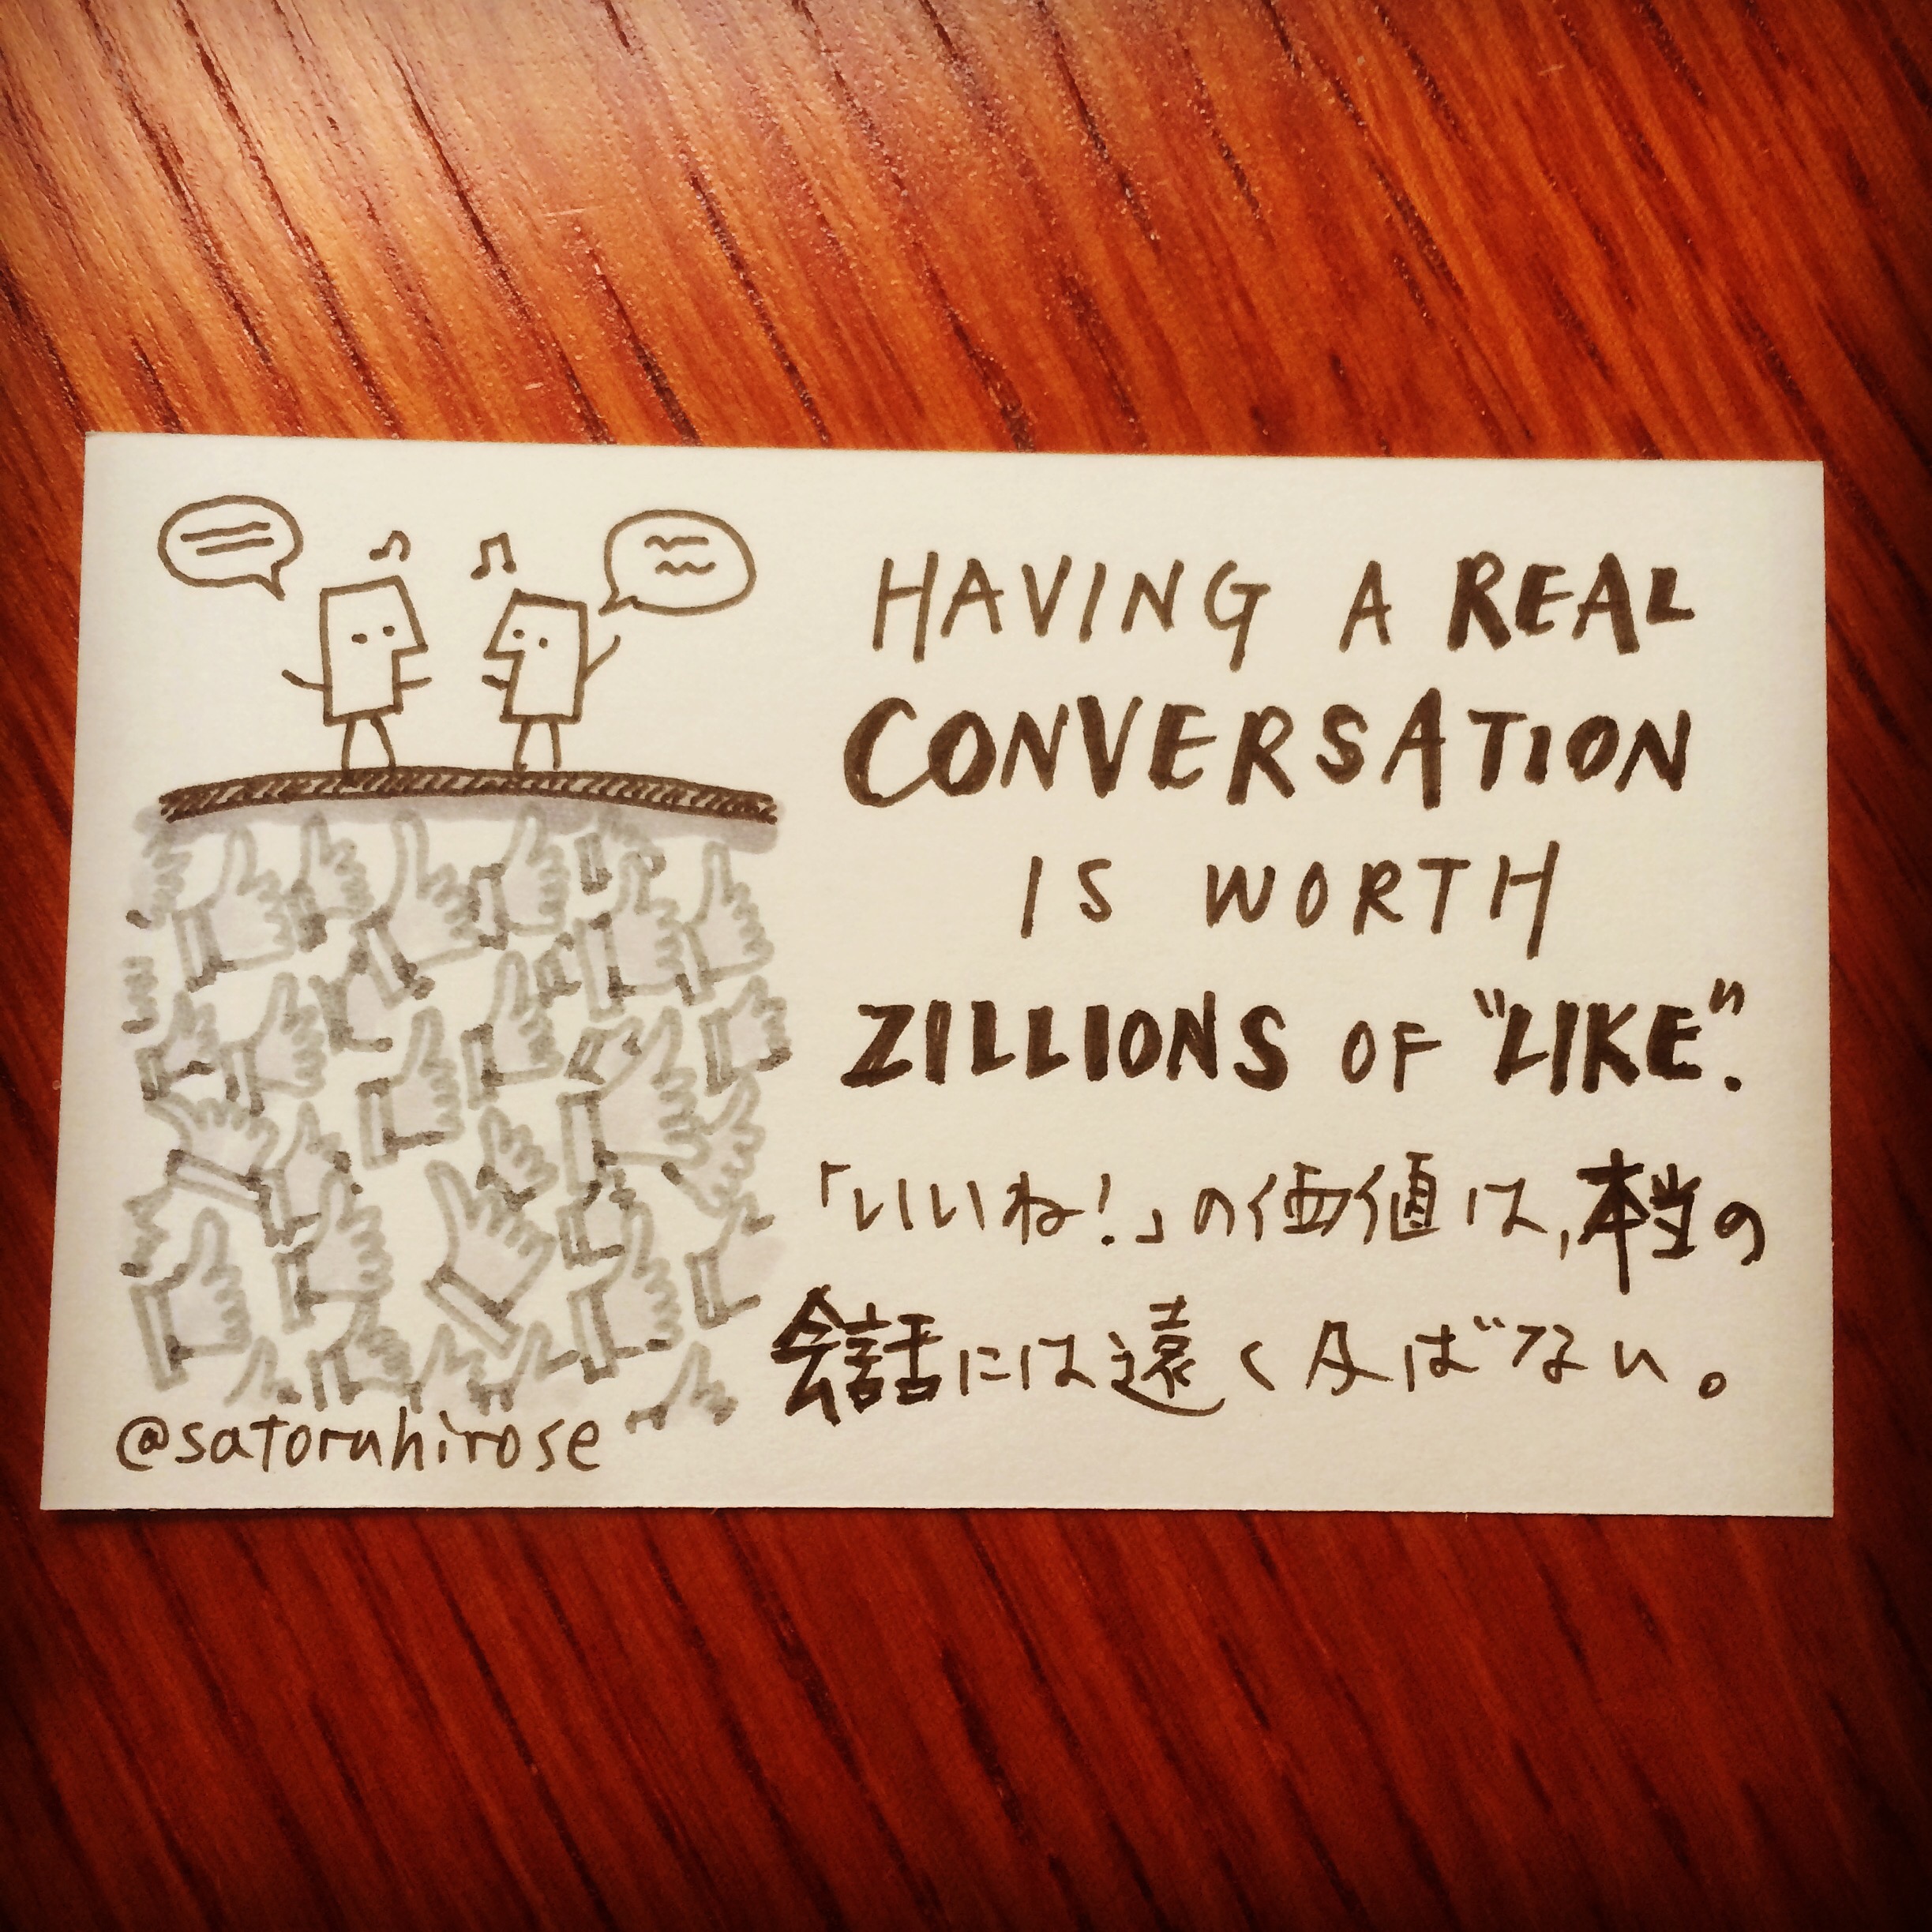 Having a real conversation is worth zillions of "Like".